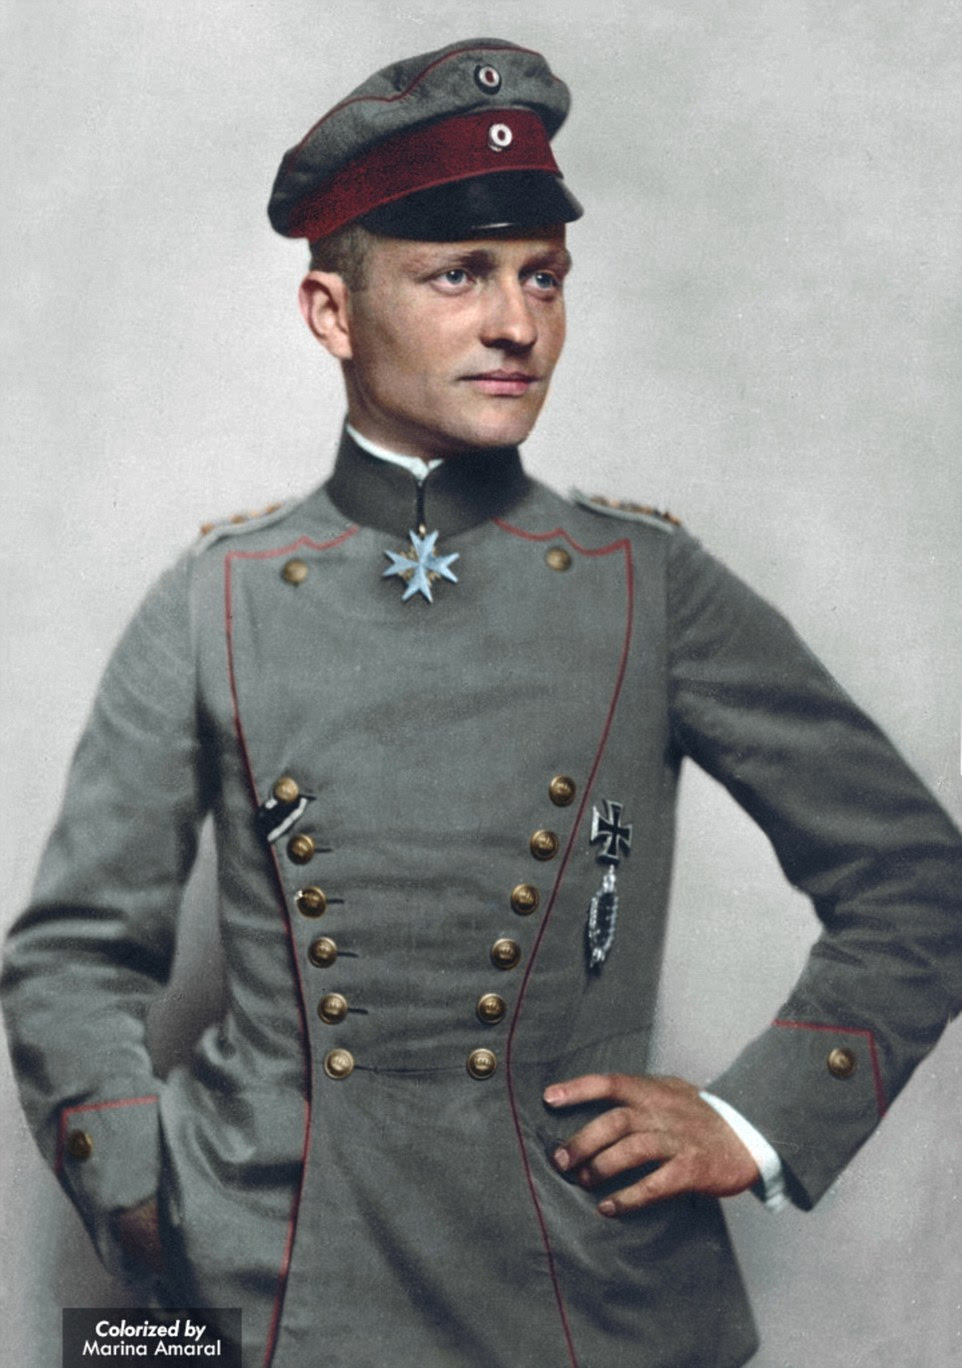 The Red Baron: Manfred von Richthofen (1892-1918) earned widespread fame as a World War I ace fighter pilot. He was credited with 80 kills before being shot down, his legend as the fearsome Red Baron enduring well after his death